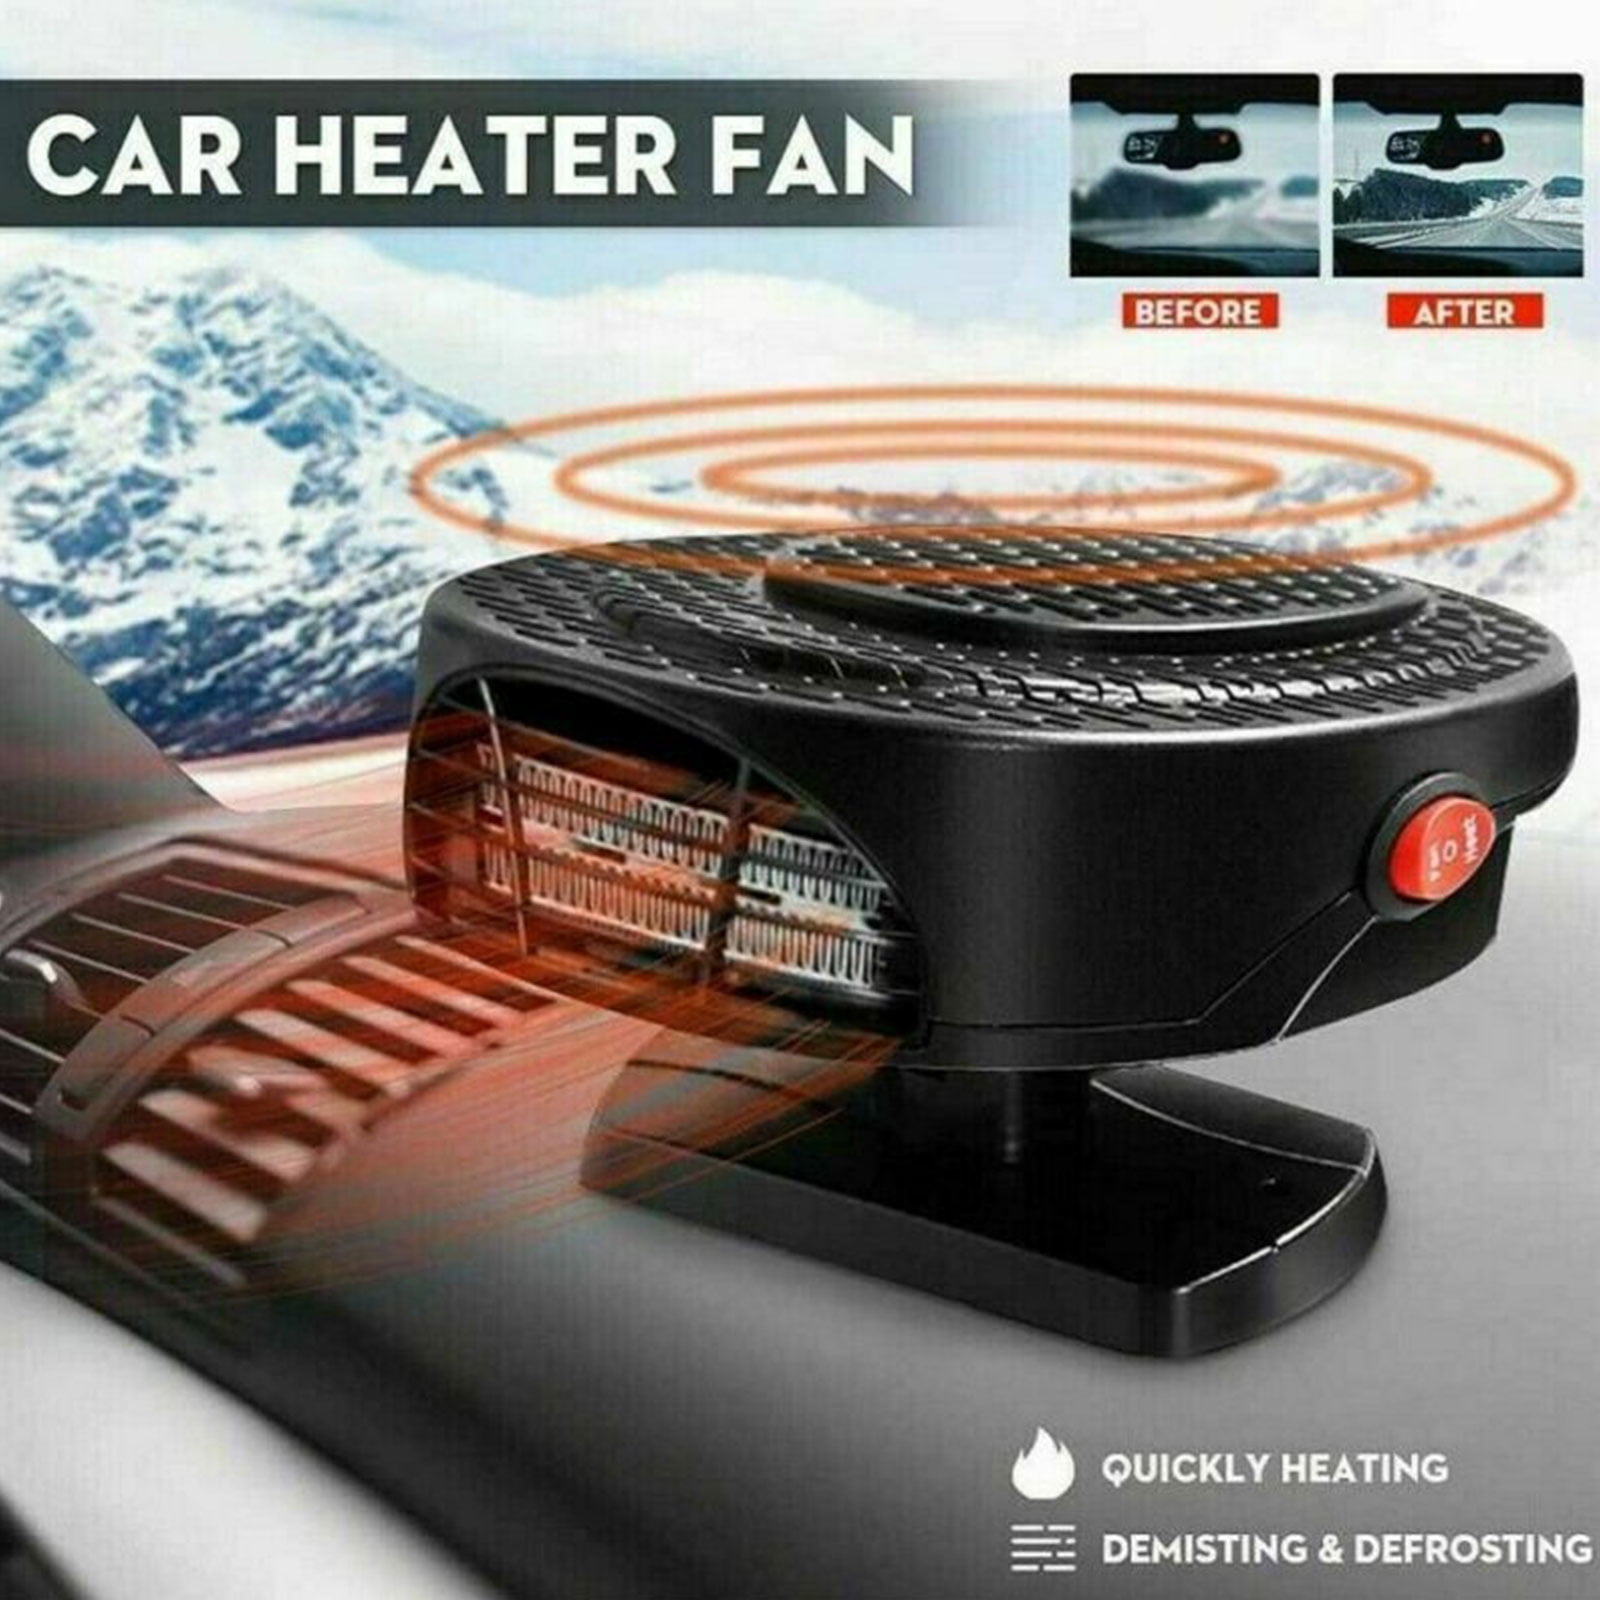 Portable 12 Volt Car Heater Heating Electric Travel Defroster Auto Vehicle  Fan